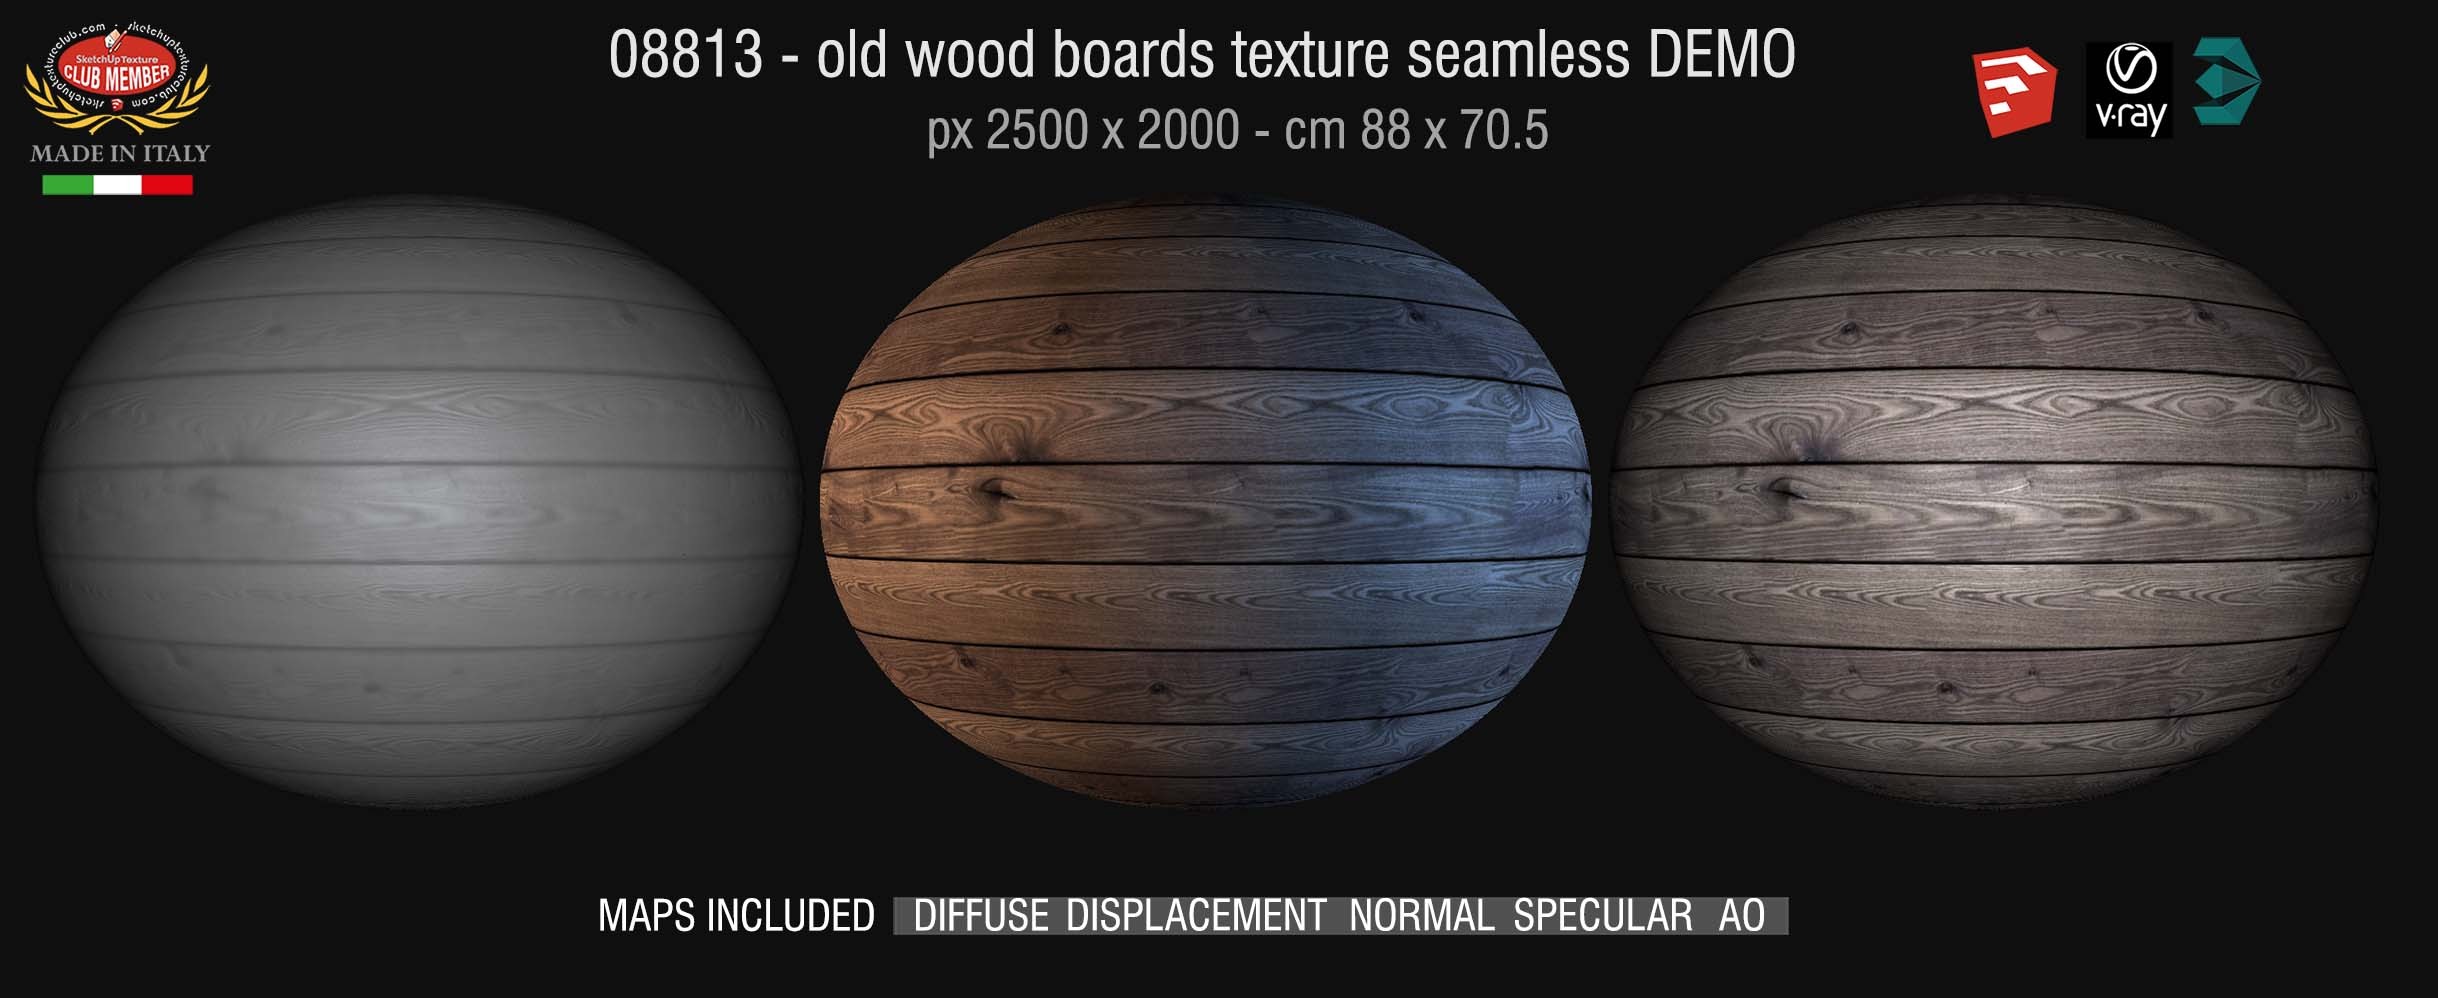 08813 HR Old wood boards texture seamless + maps DEMO